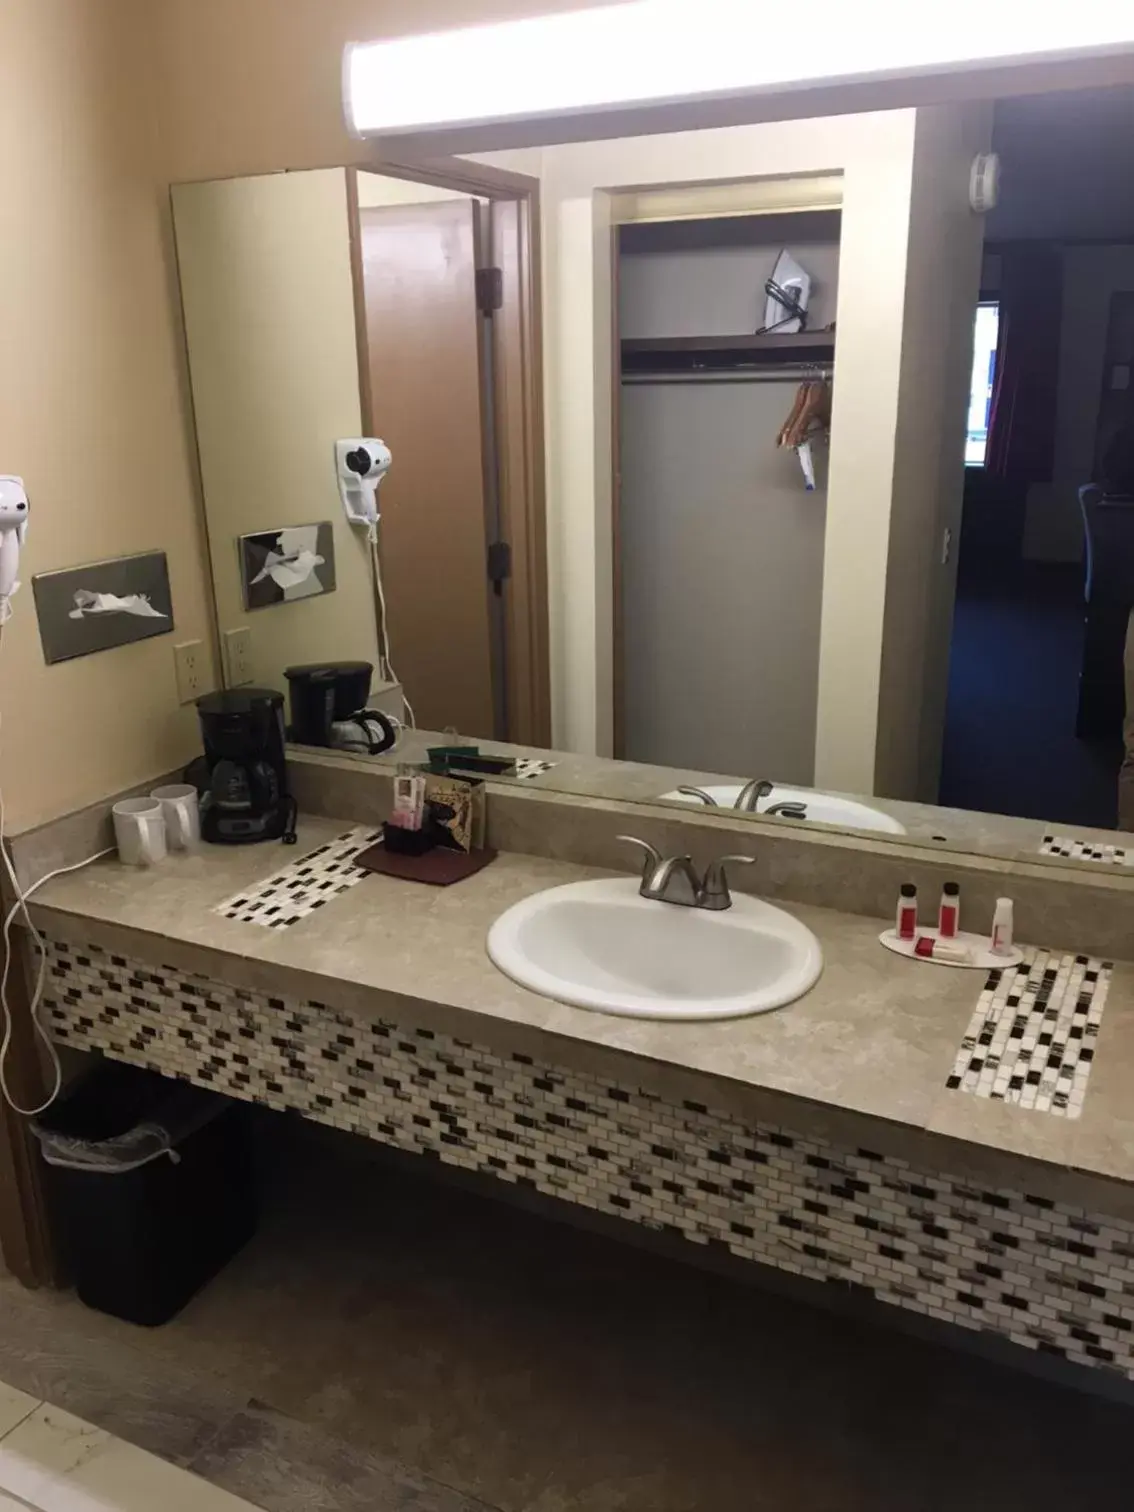 Deluxe King Room - Non-Smoking in Days Inn by Wyndham Bend